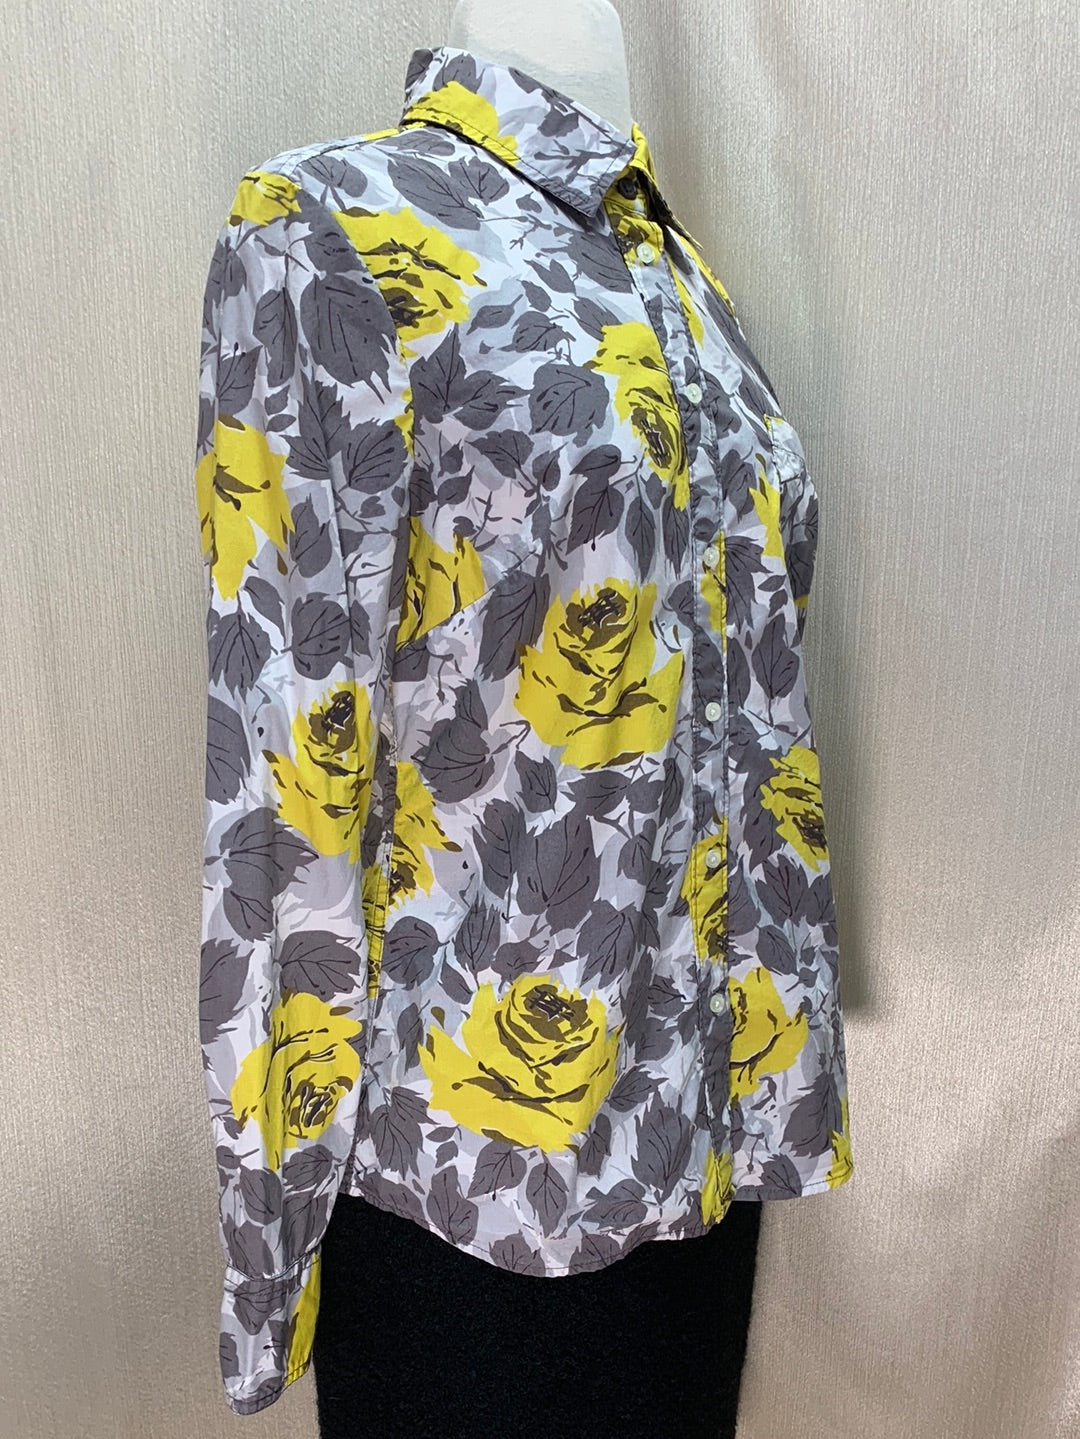 BODEN yellow gray floral 100% Cotton Long Sleeve Button Up Top - US 8